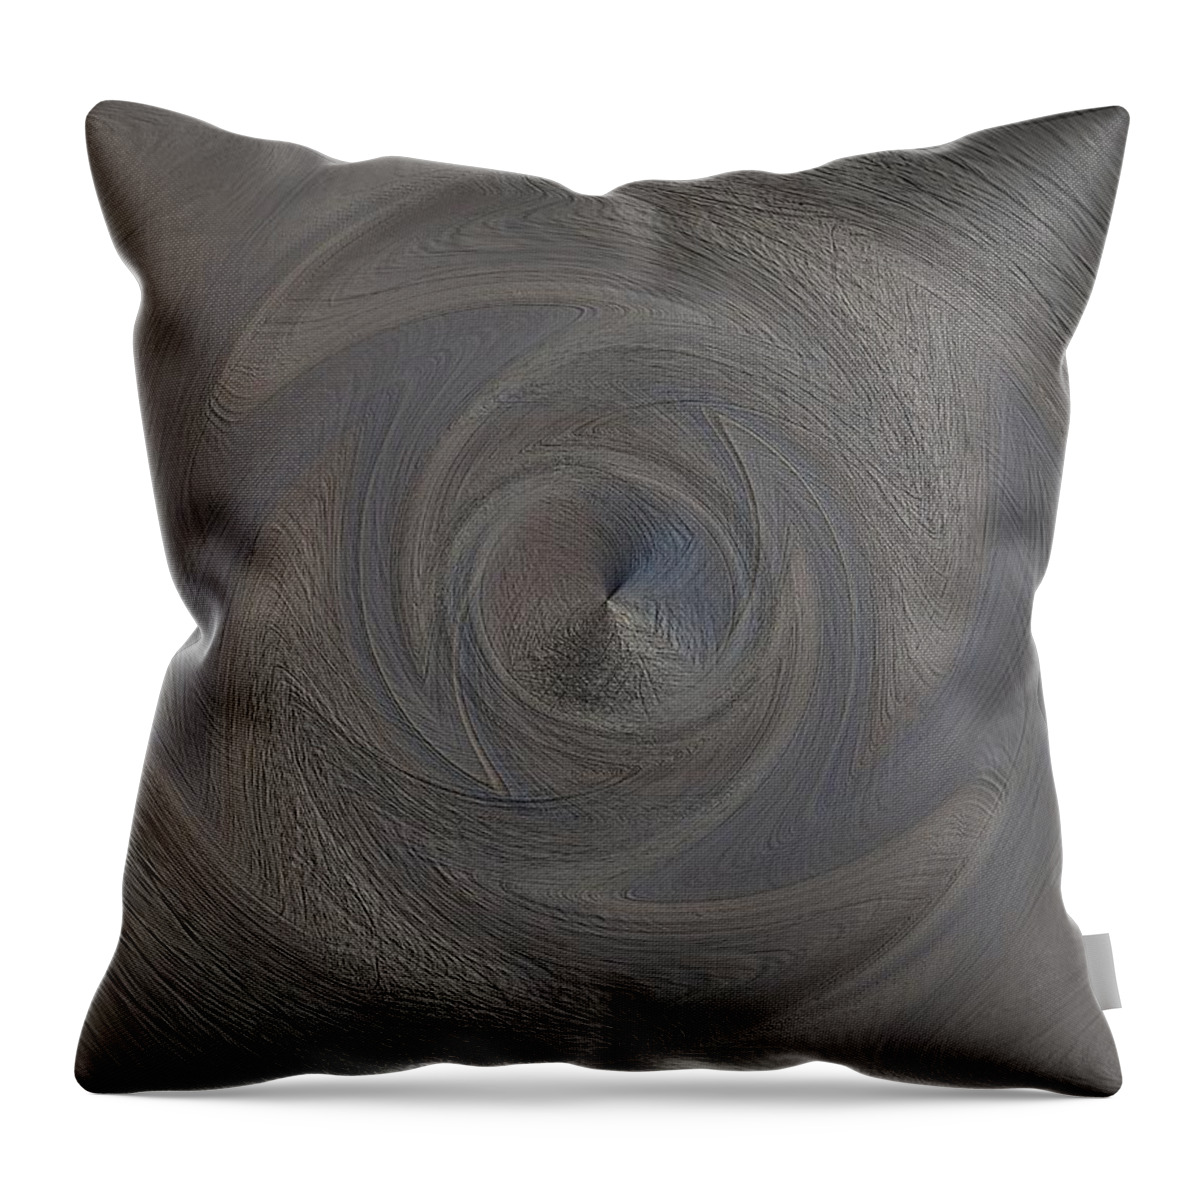 Abstract Throw Pillow featuring the digital art The Point Within by Tim Allen